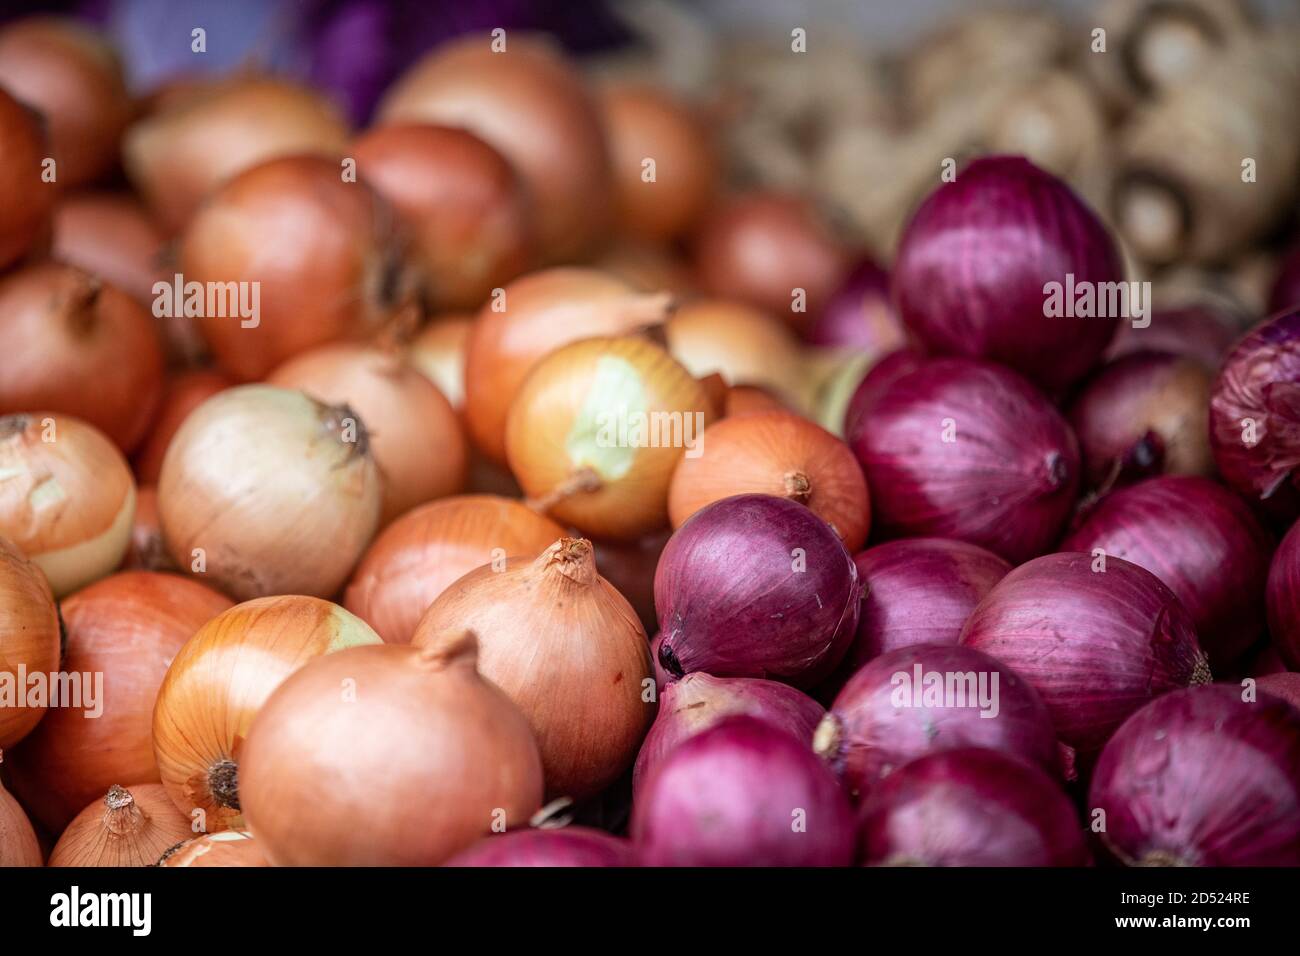 Onions on display at a farmers market Stock Photo